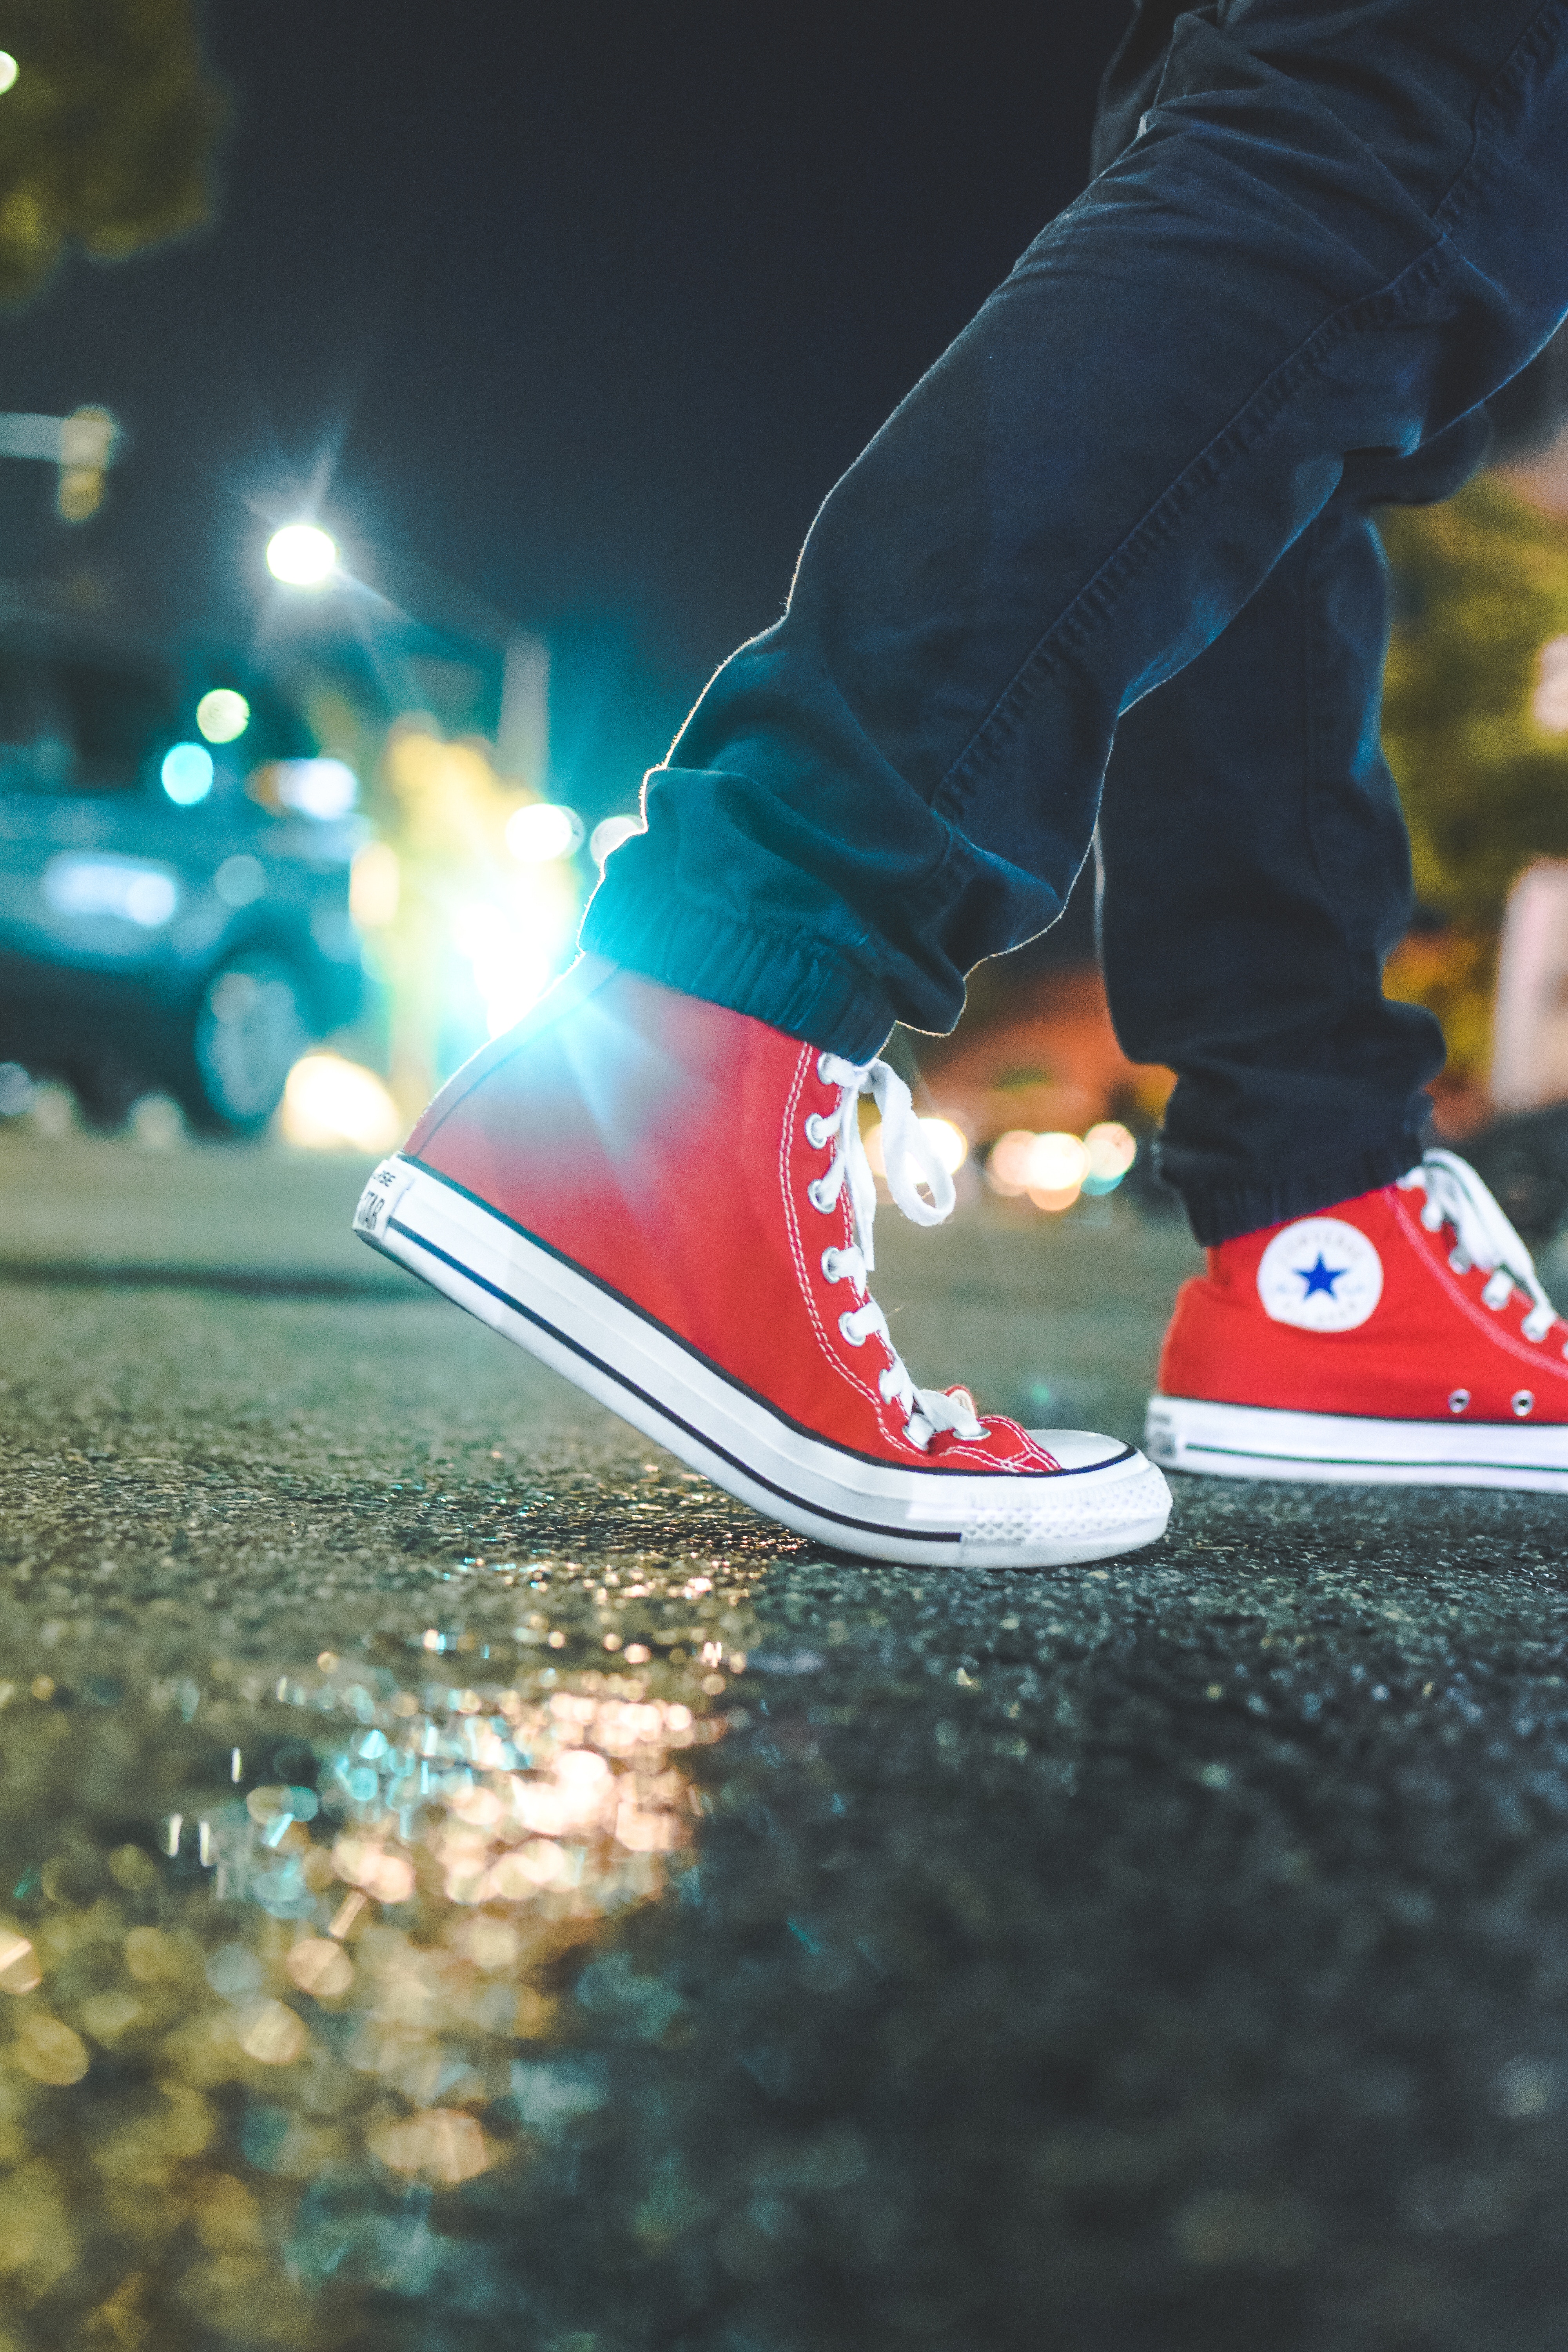 shoes, red, glare, miscellanea, miscellaneous, legs, sneakers, asphalt iphone wallpaper